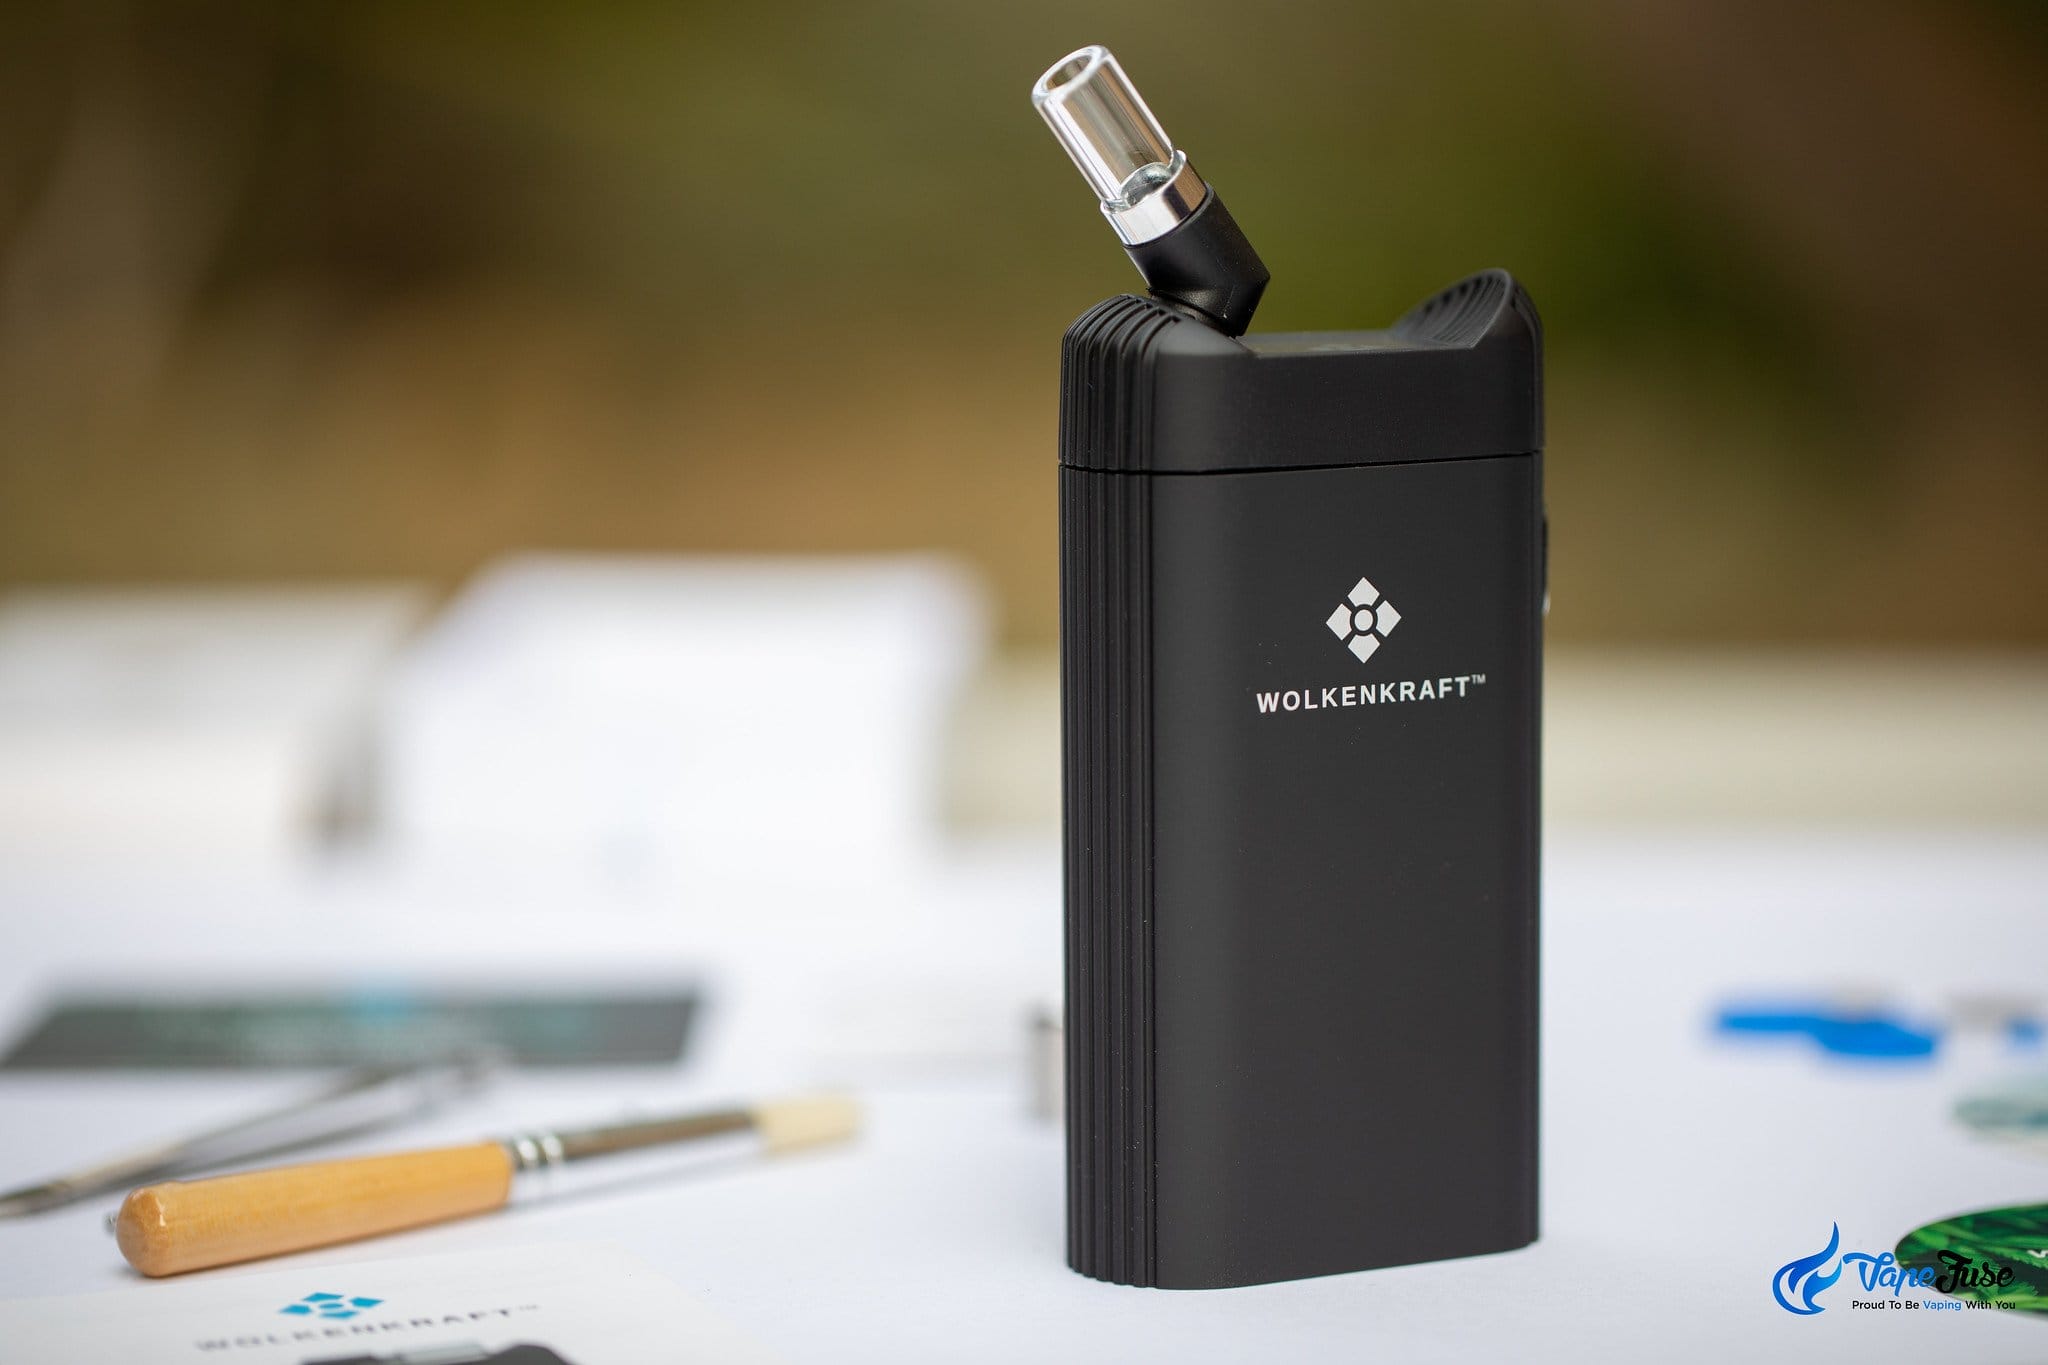 Wolkenkraft FX+ Dry Herb Convection Vaporizer Review